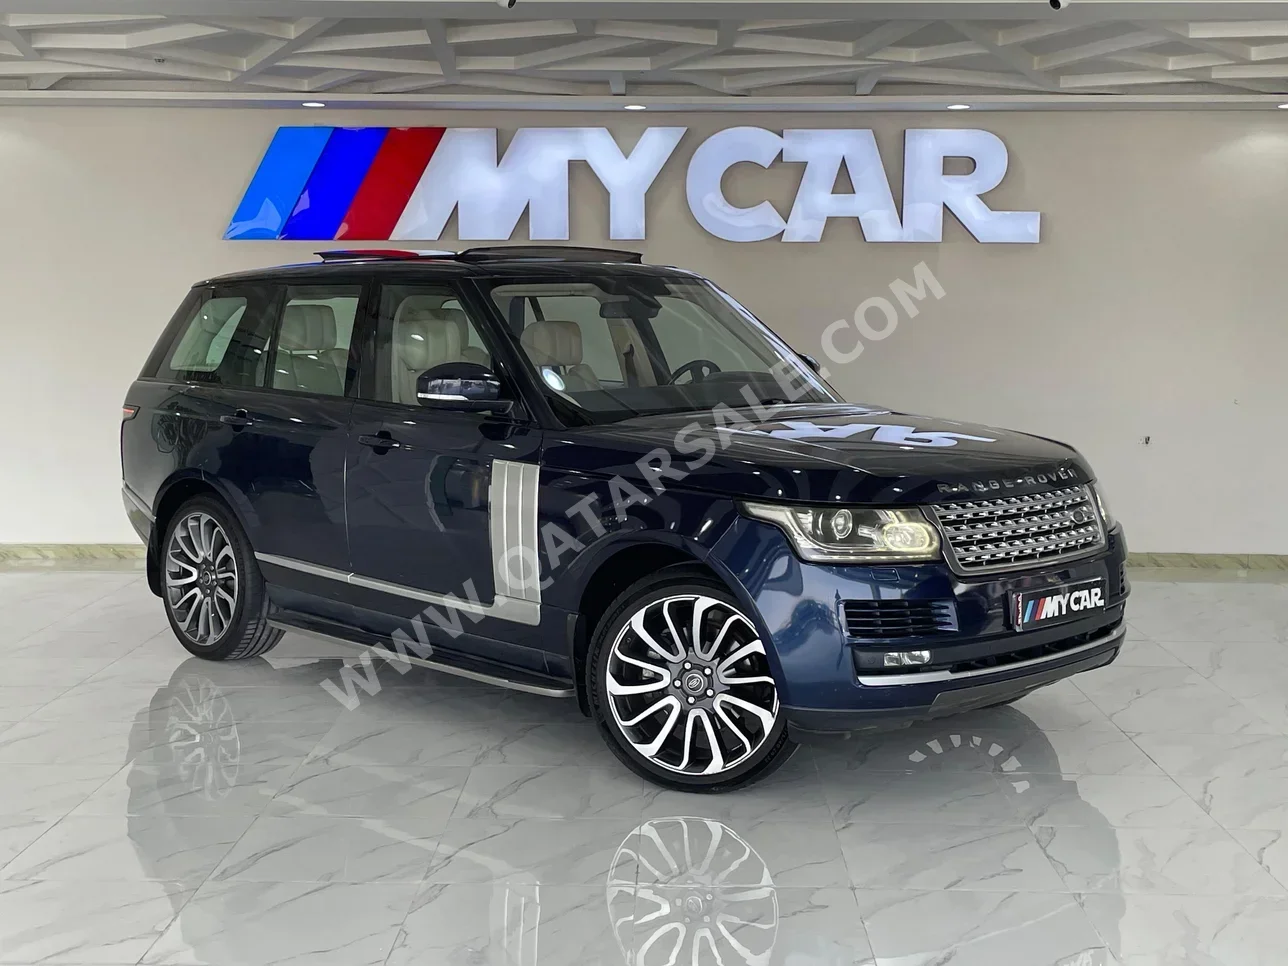 Land Rover  Range Rover  Vogue HSE  2016  Automatic  132,000 Km  8 Cylinder  Four Wheel Drive (4WD)  SUV  Blue